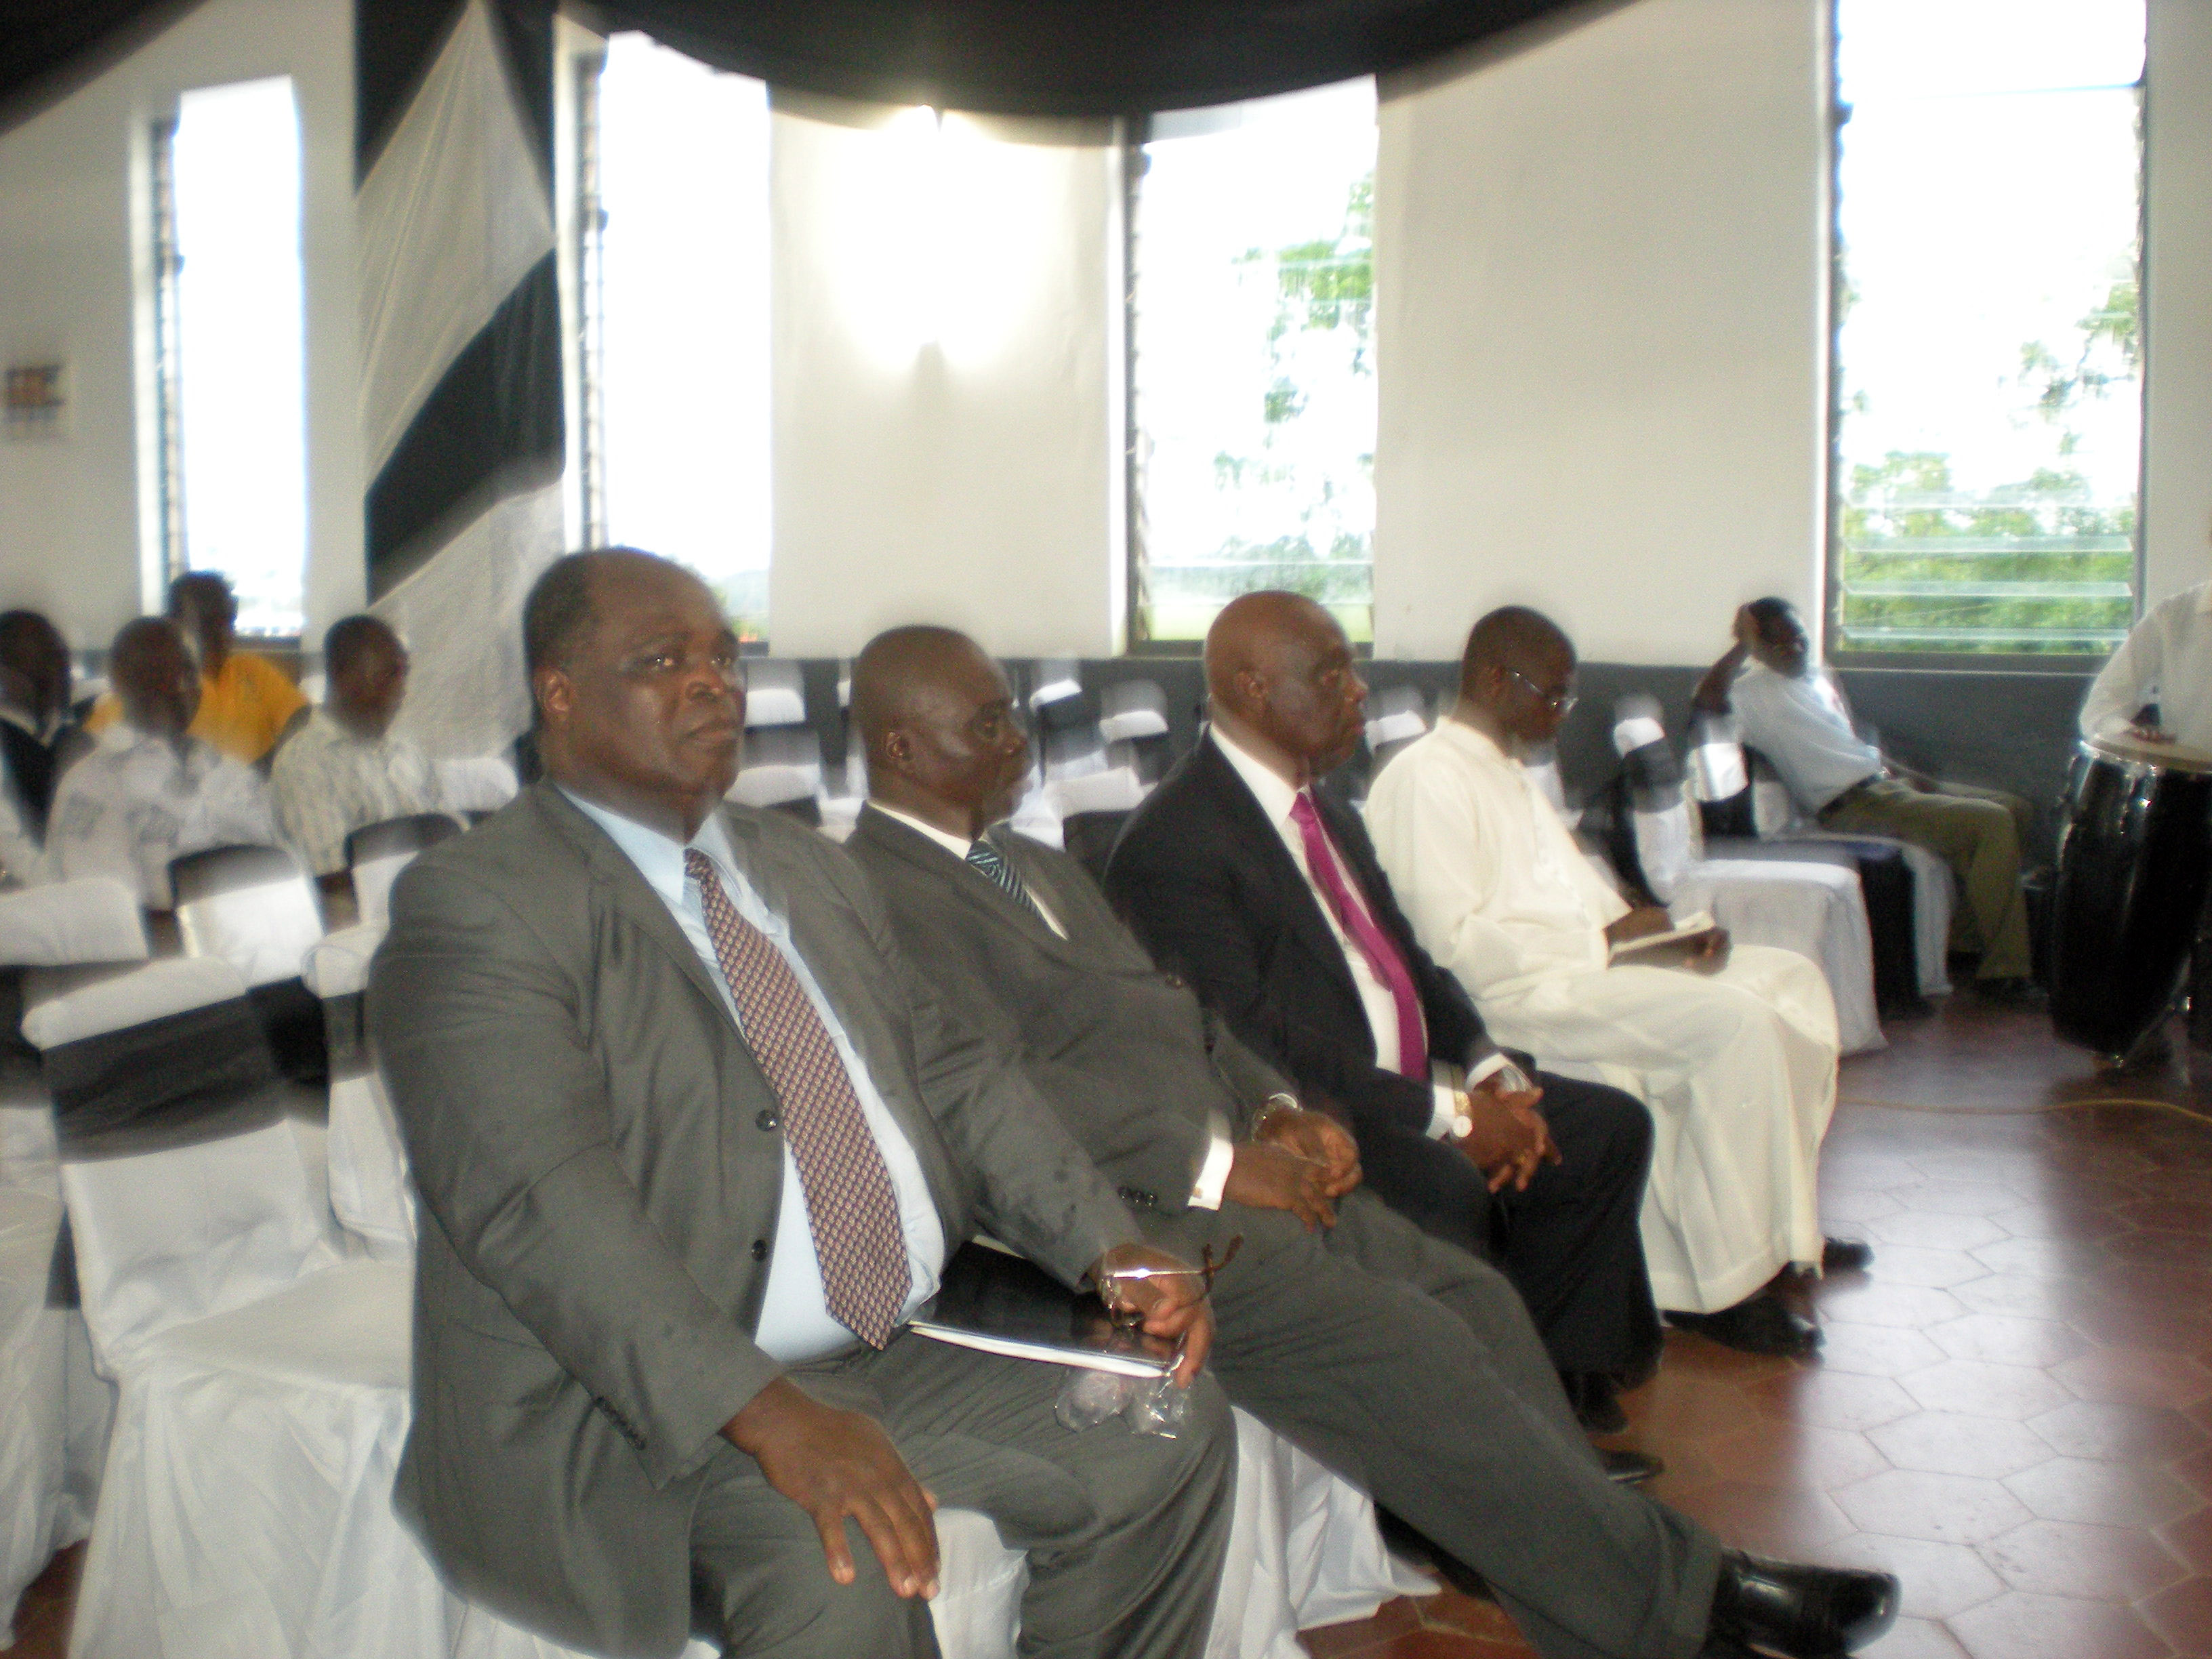 [From Left] Dr. Ebo Richardson, Mr. Ebow Daniel, The Rt. Hon Ebenezer Sekyi Hughes, and Bishop D.S.A. Allotey